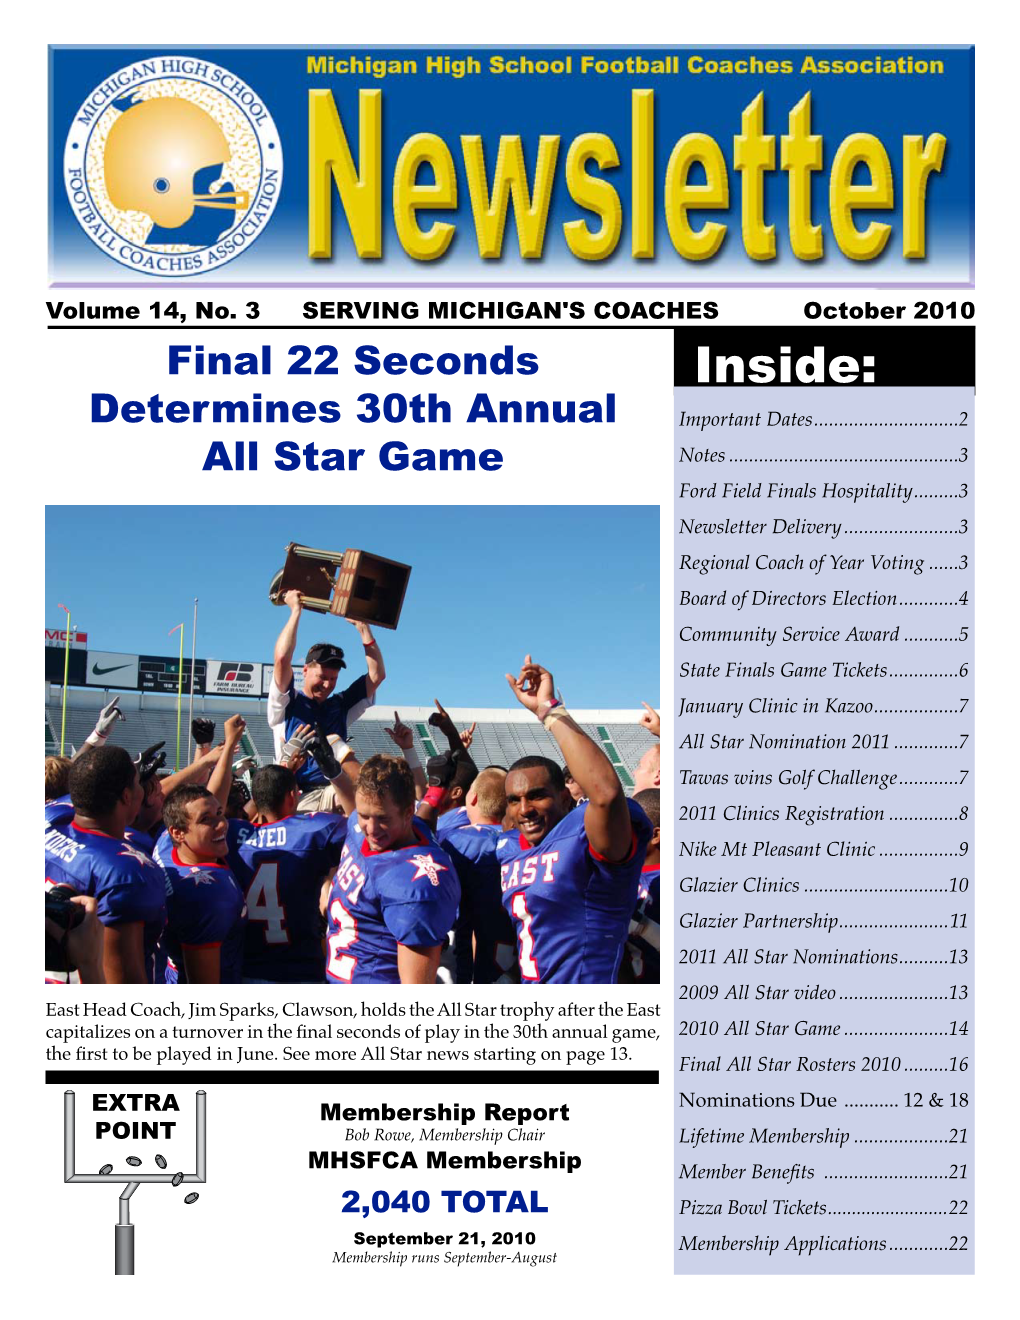 Inside: Determines 30Th Annual Important Dates